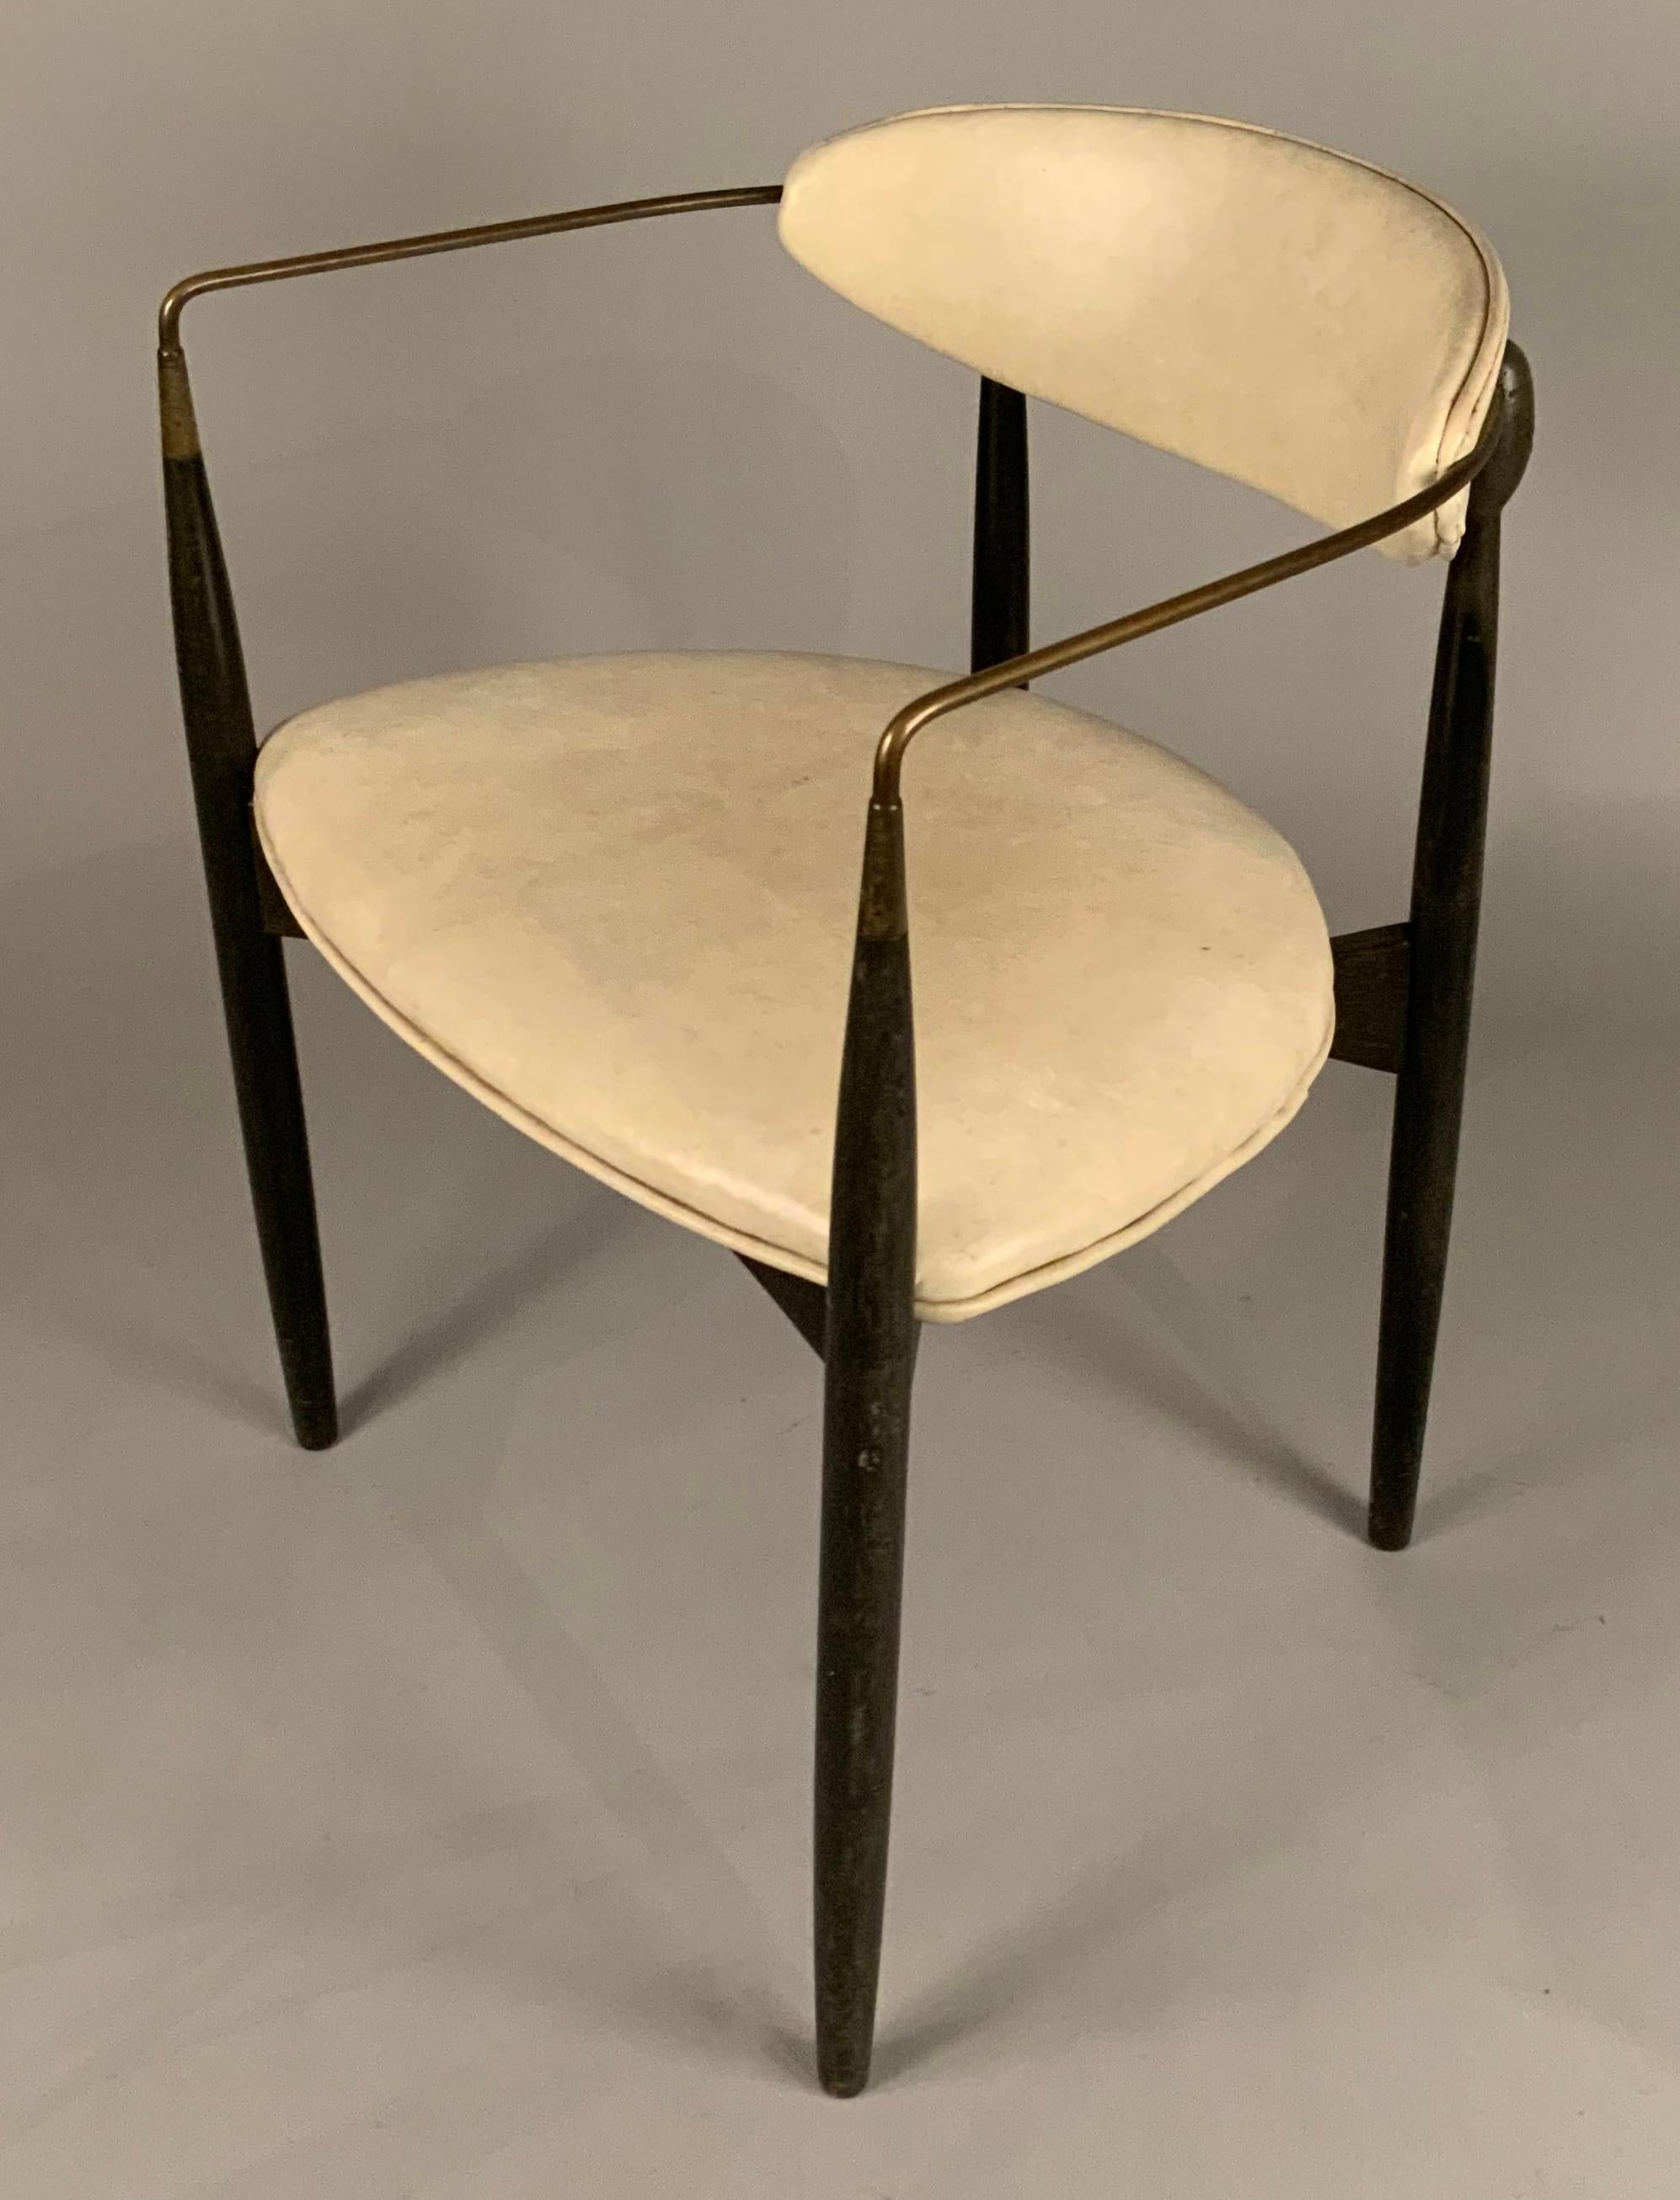 American 1950's Brass 'Viscount' Armchair by Dan Johnson for Selig